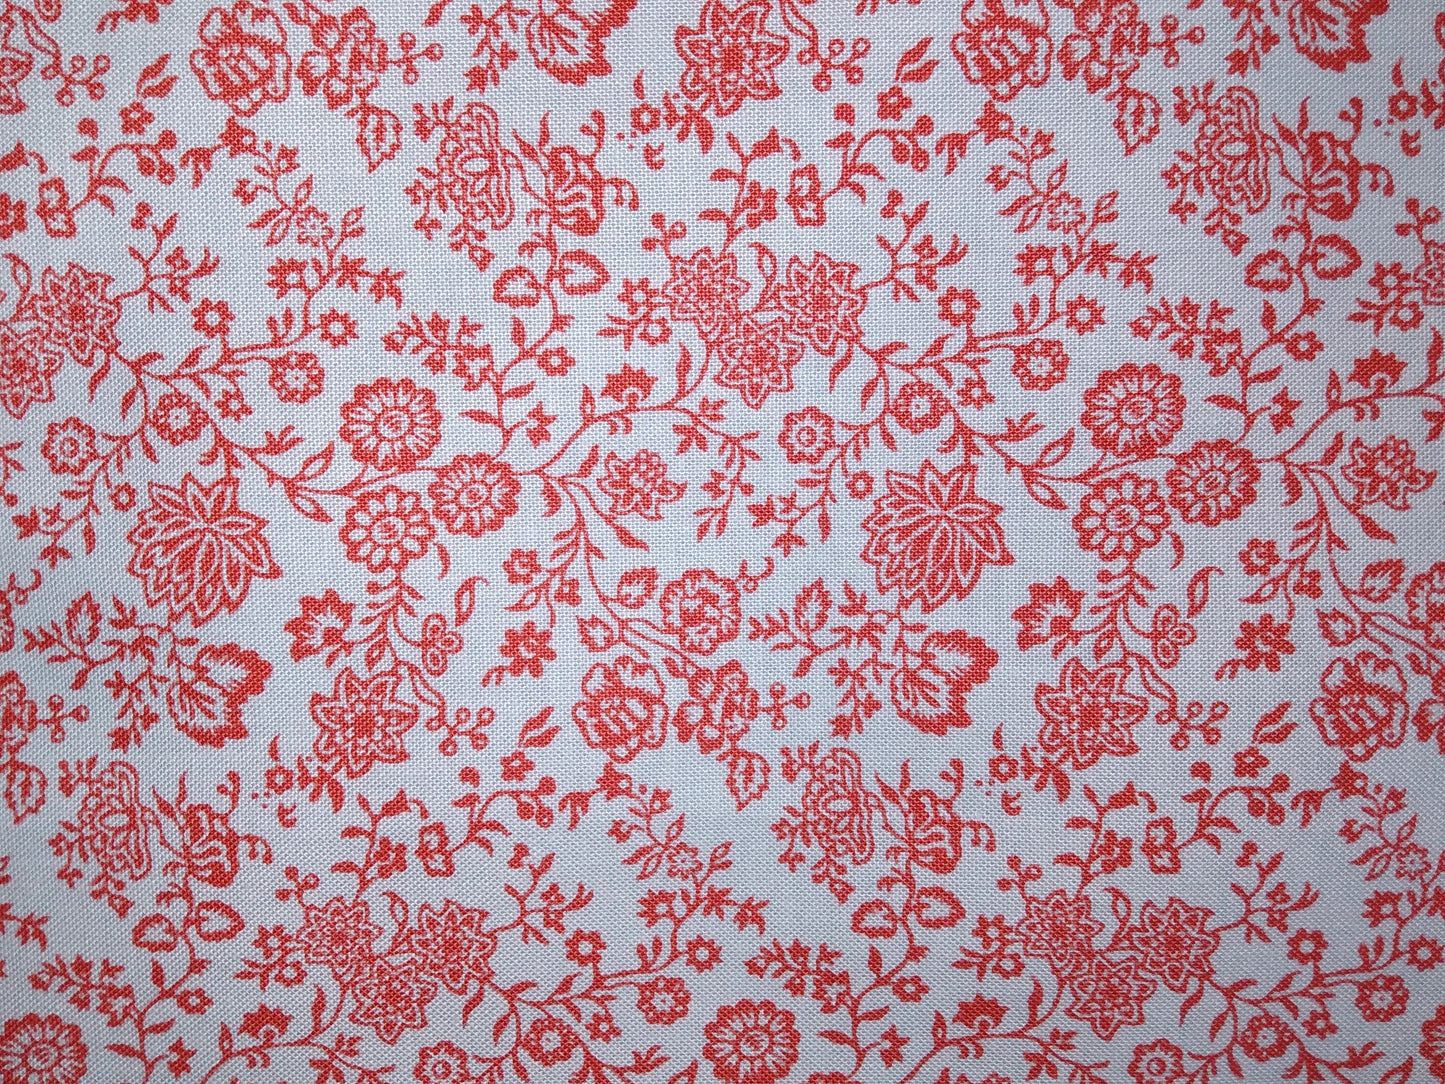 Napkins 100% Liberty Print Cotton Red Floral Light Blue 16 by 16 Dinner